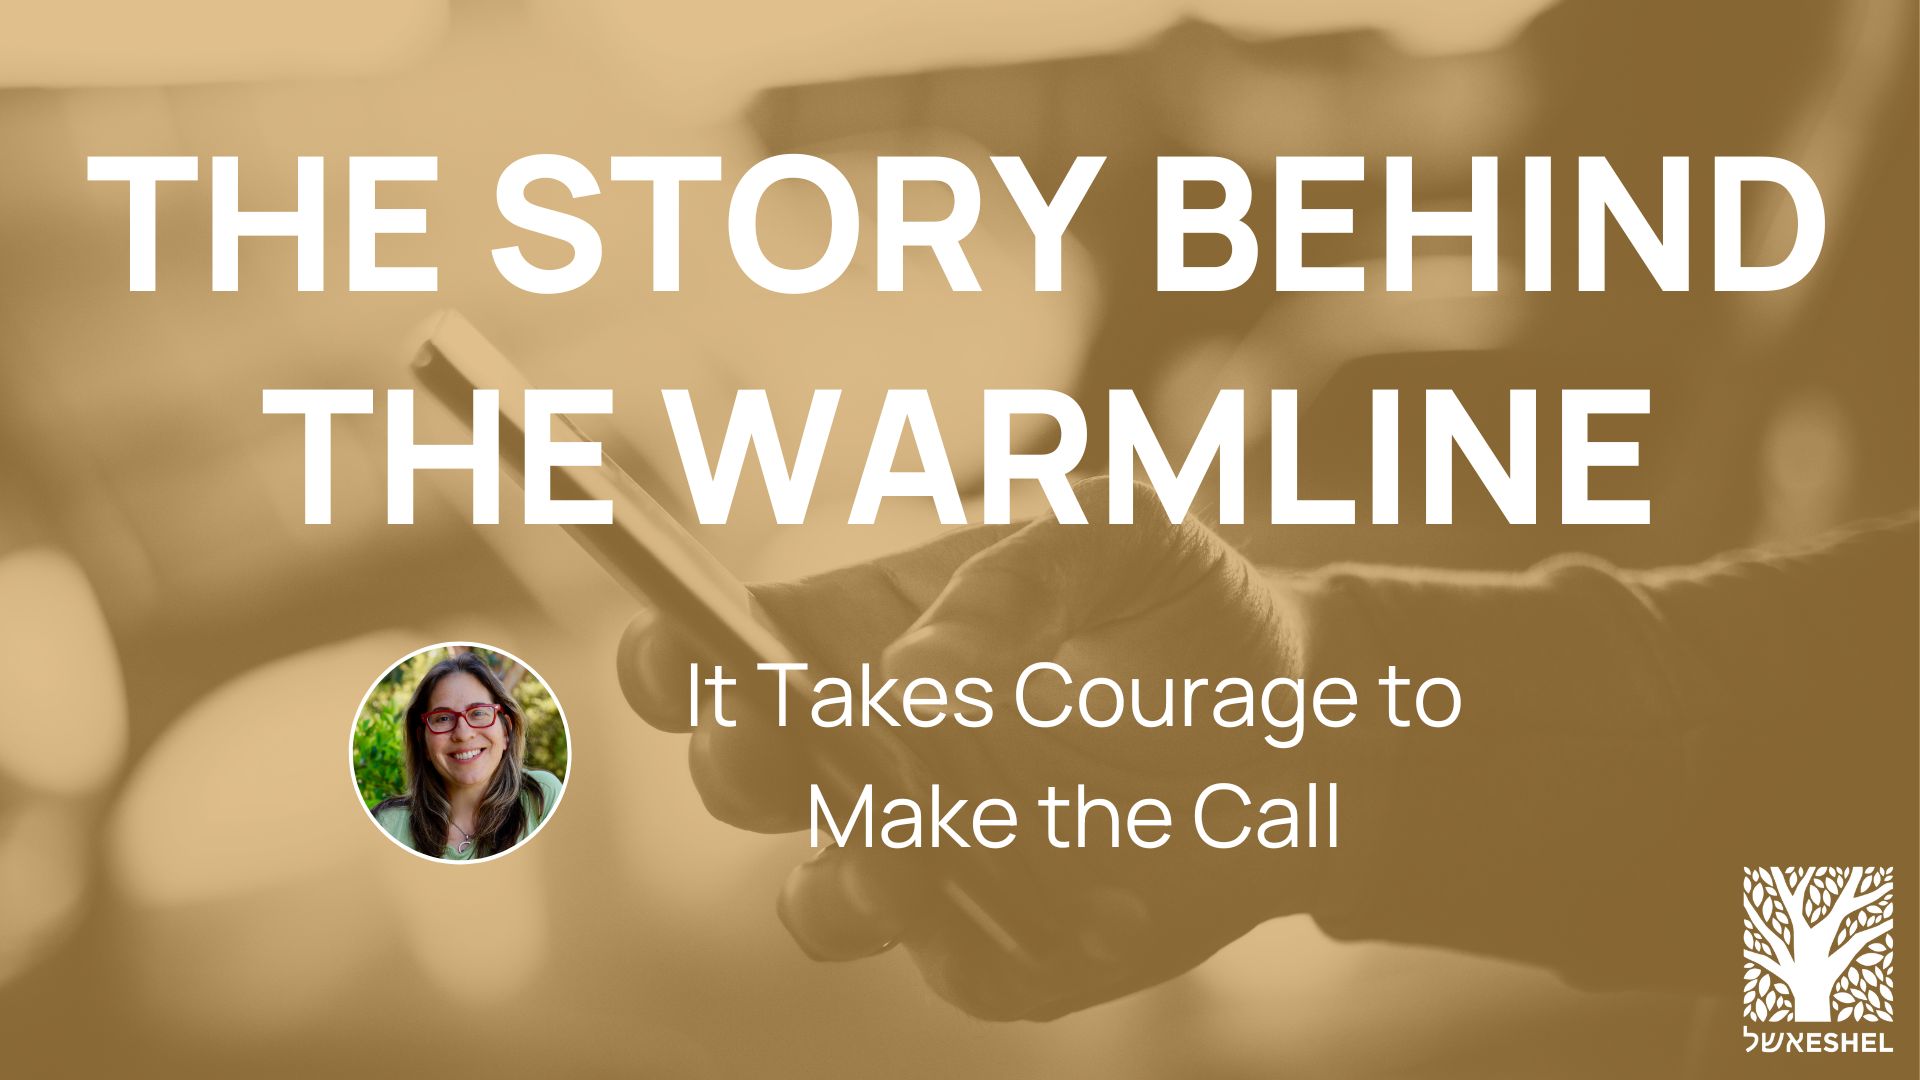 The Story Behind the Warmline: It Takes Courage to Make the Call